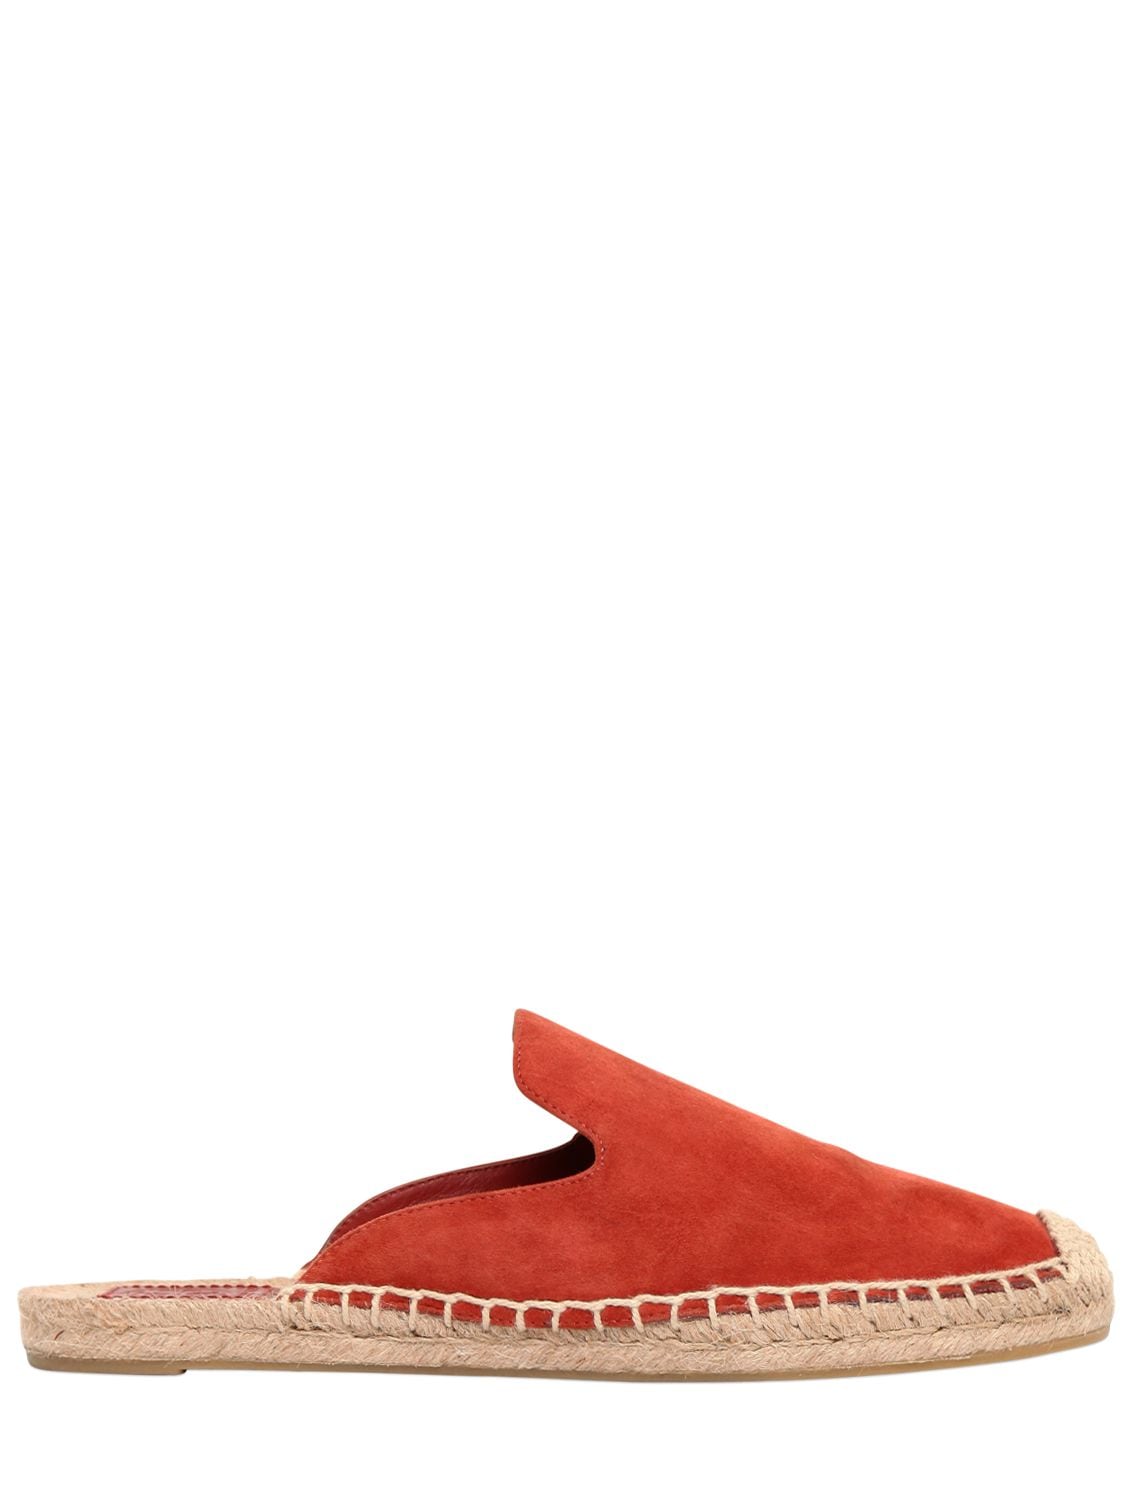 Tory Burch 20mm Max Suede Mule Espadrilles In Red | ModeSens